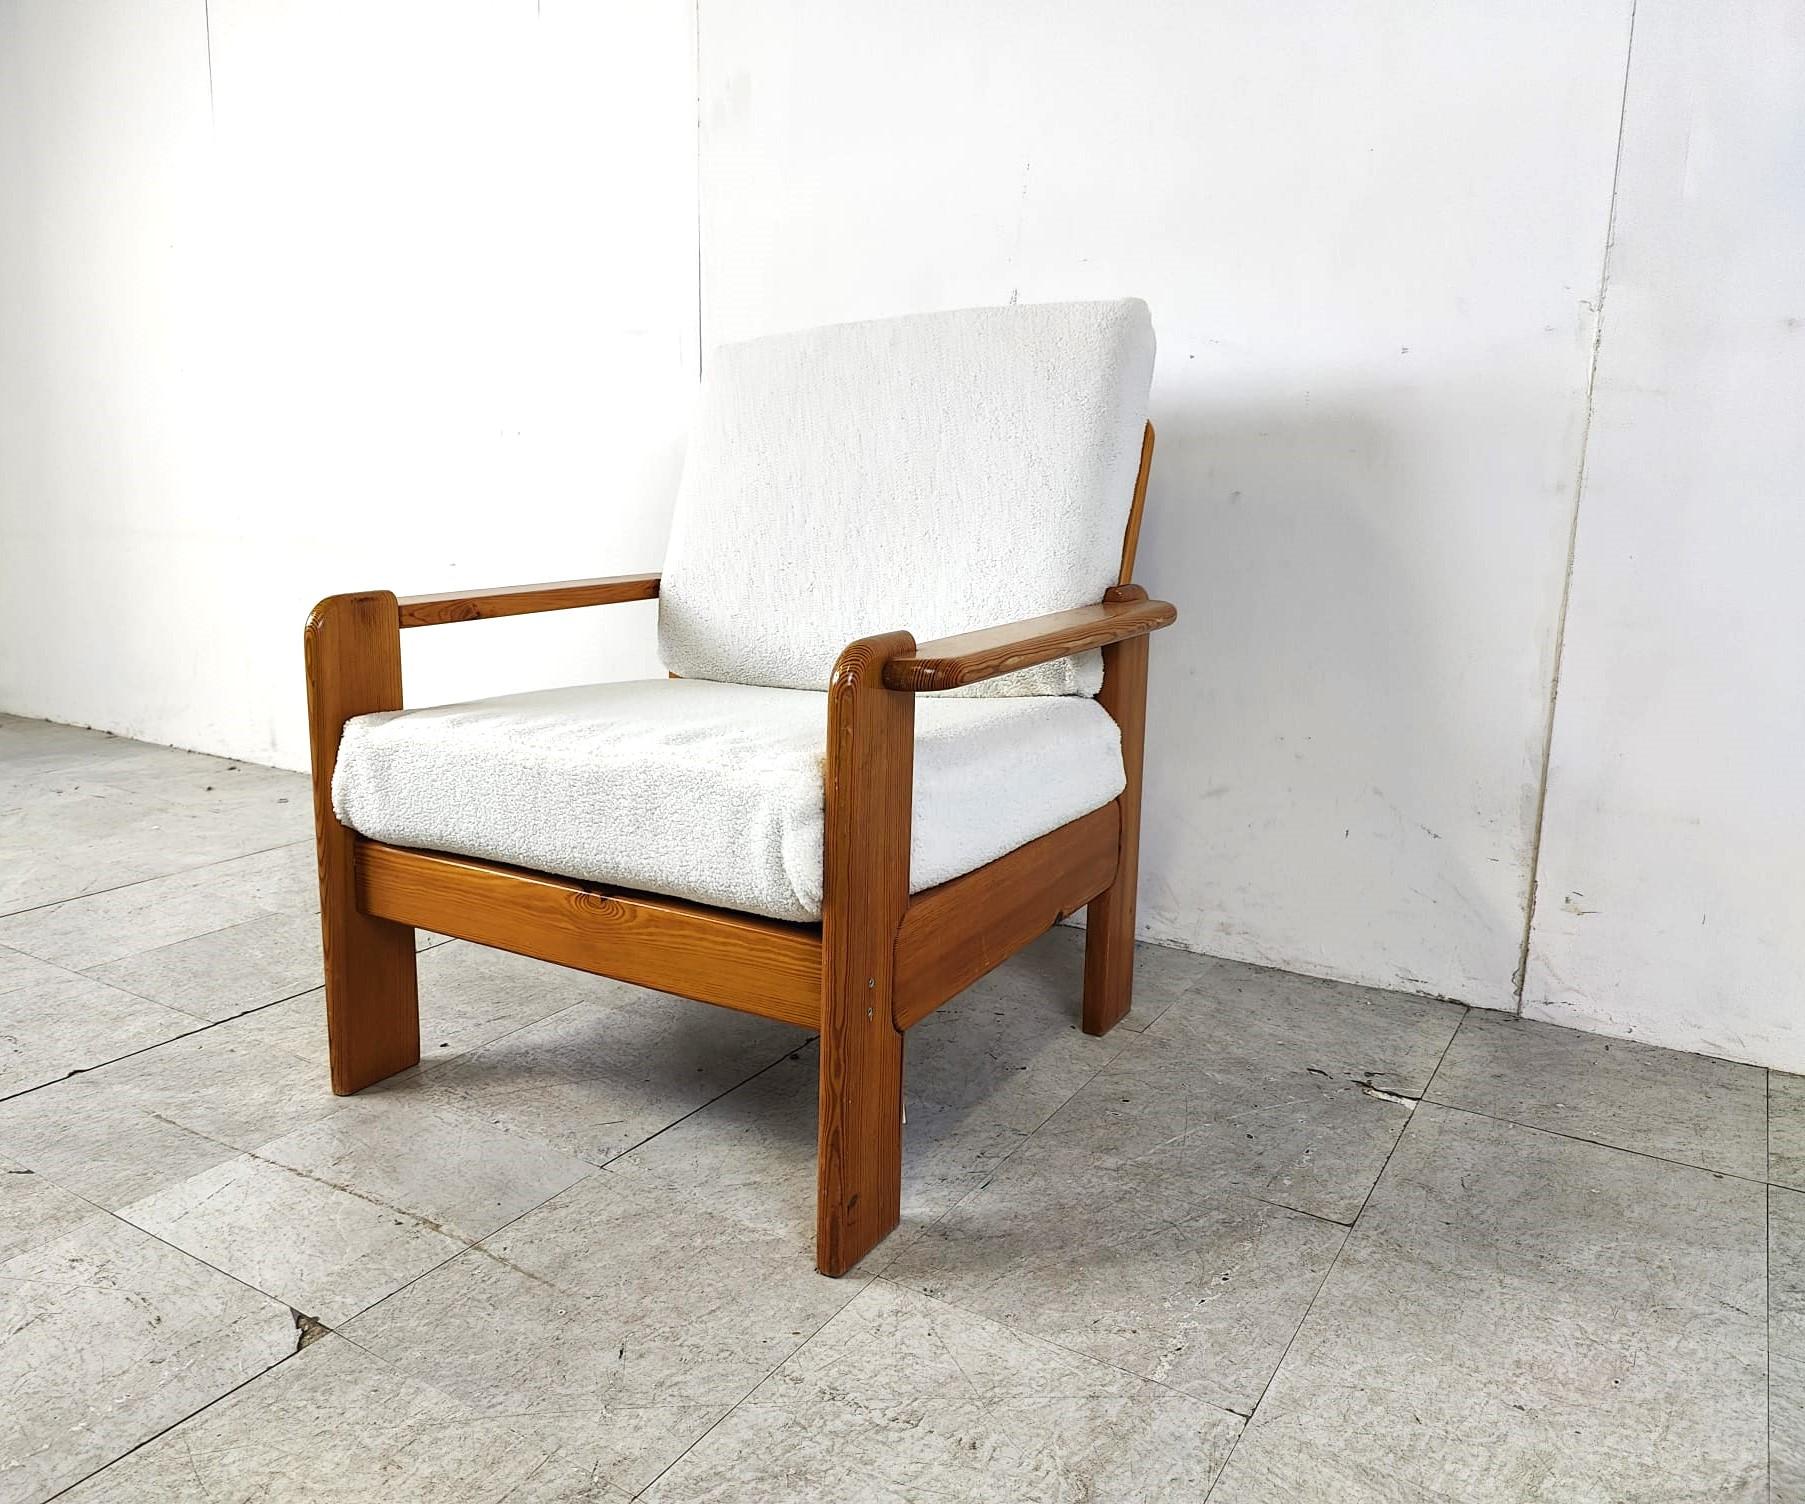 Vintage pine wood armchair with a well designed interlocking frame and reupholstered cushions in white bouclé for a cosy and warm look.

1960s - Denmark

Dimensions
Height: 85cm
Width x depth: 75cm
Seat height: 40cm

Ref.: 860164